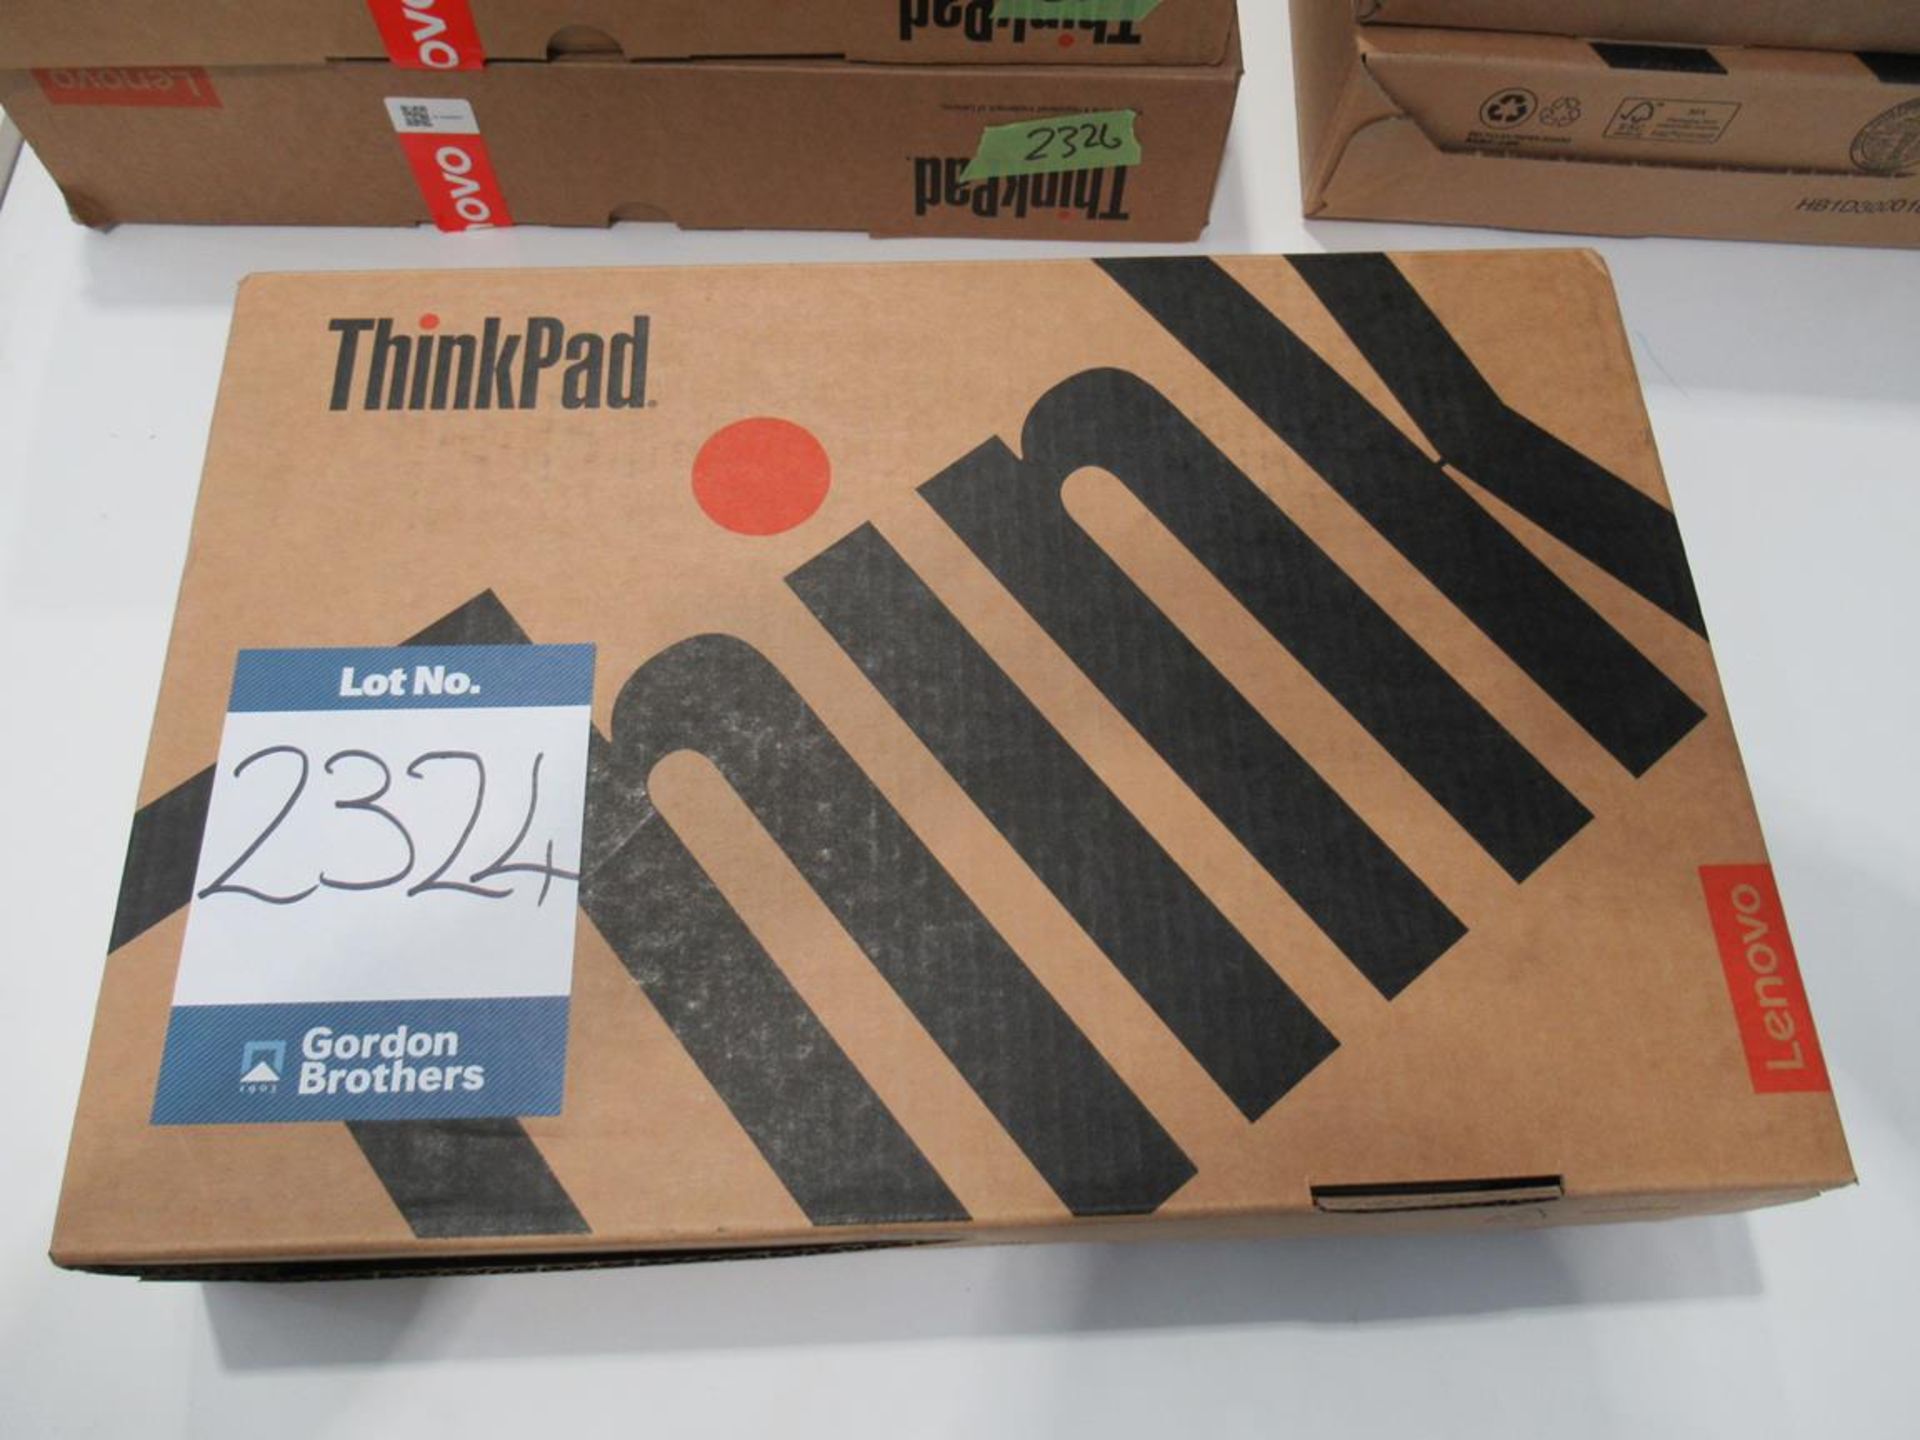 ThinkPad, P14s Gen 2 standard specification (boxed)